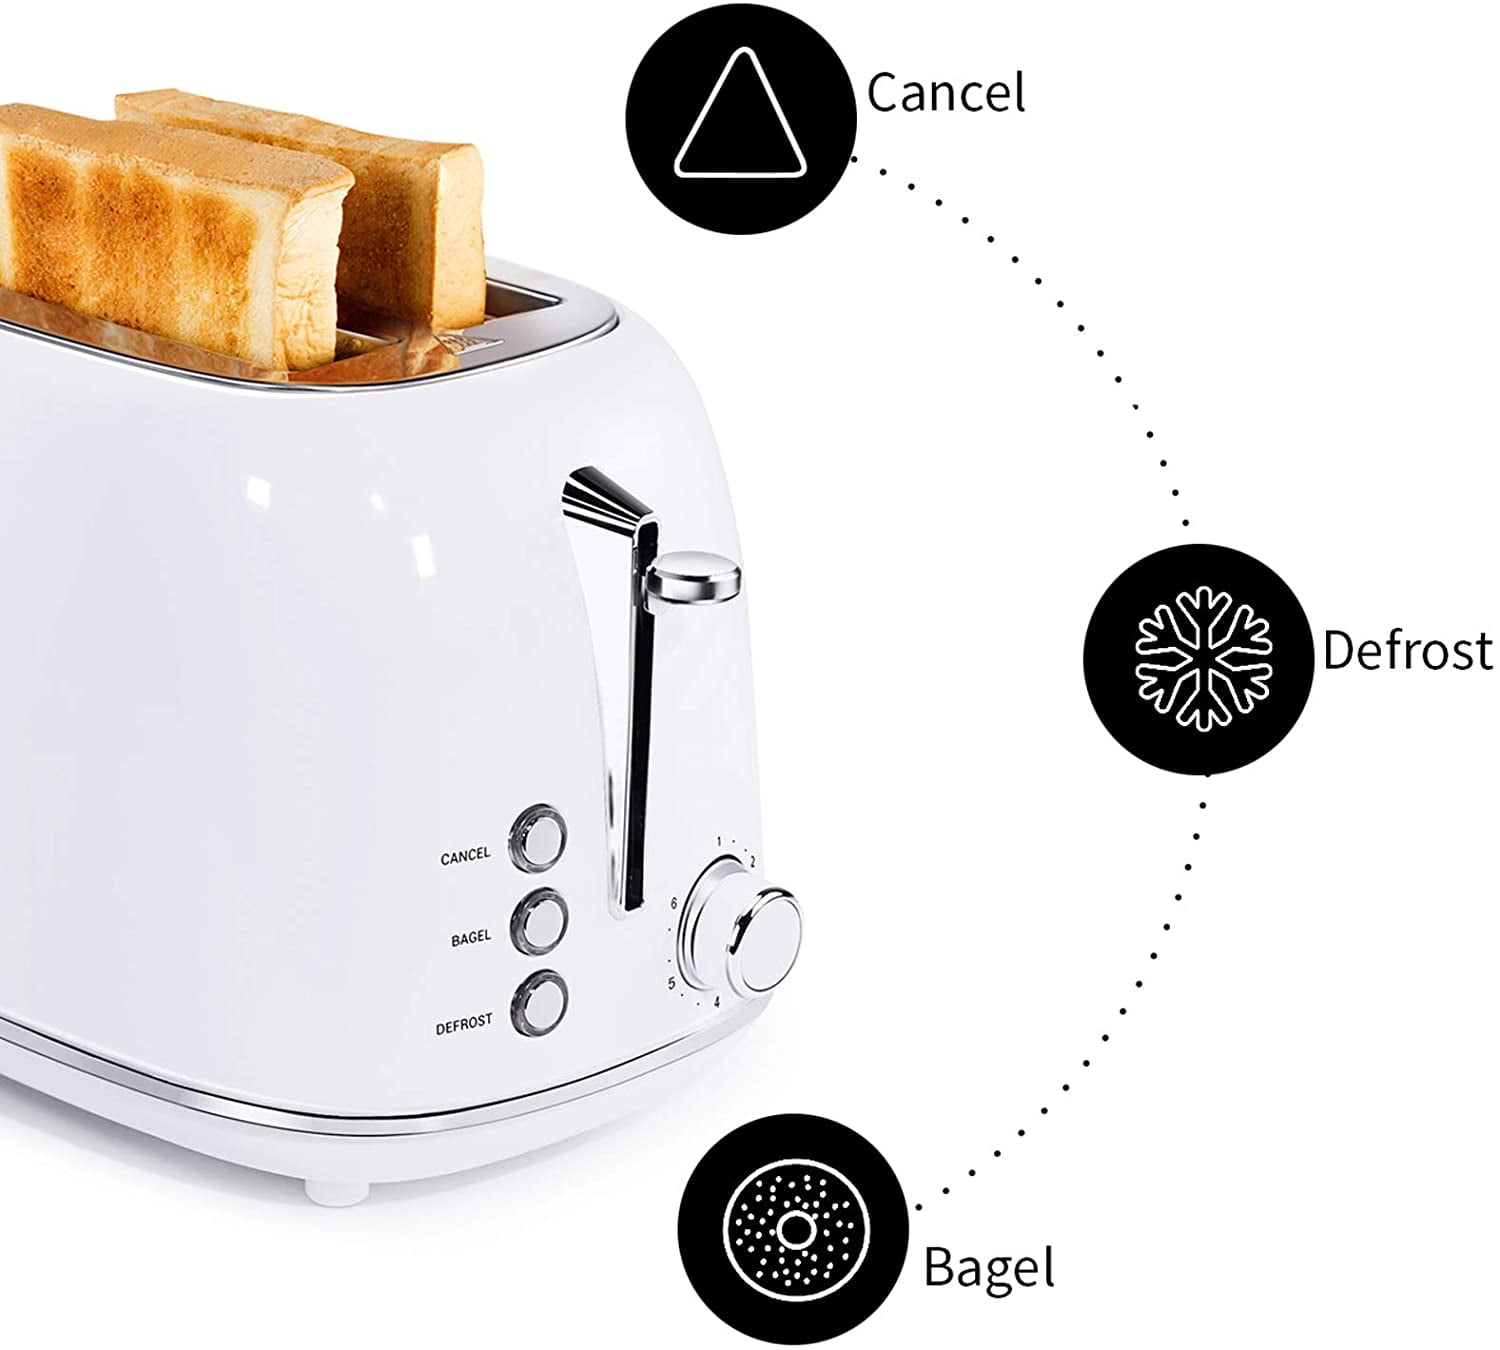 Keenstone Wt330 2 Slice Toaster Retro Stainless Steel Toaster Green for  sale online